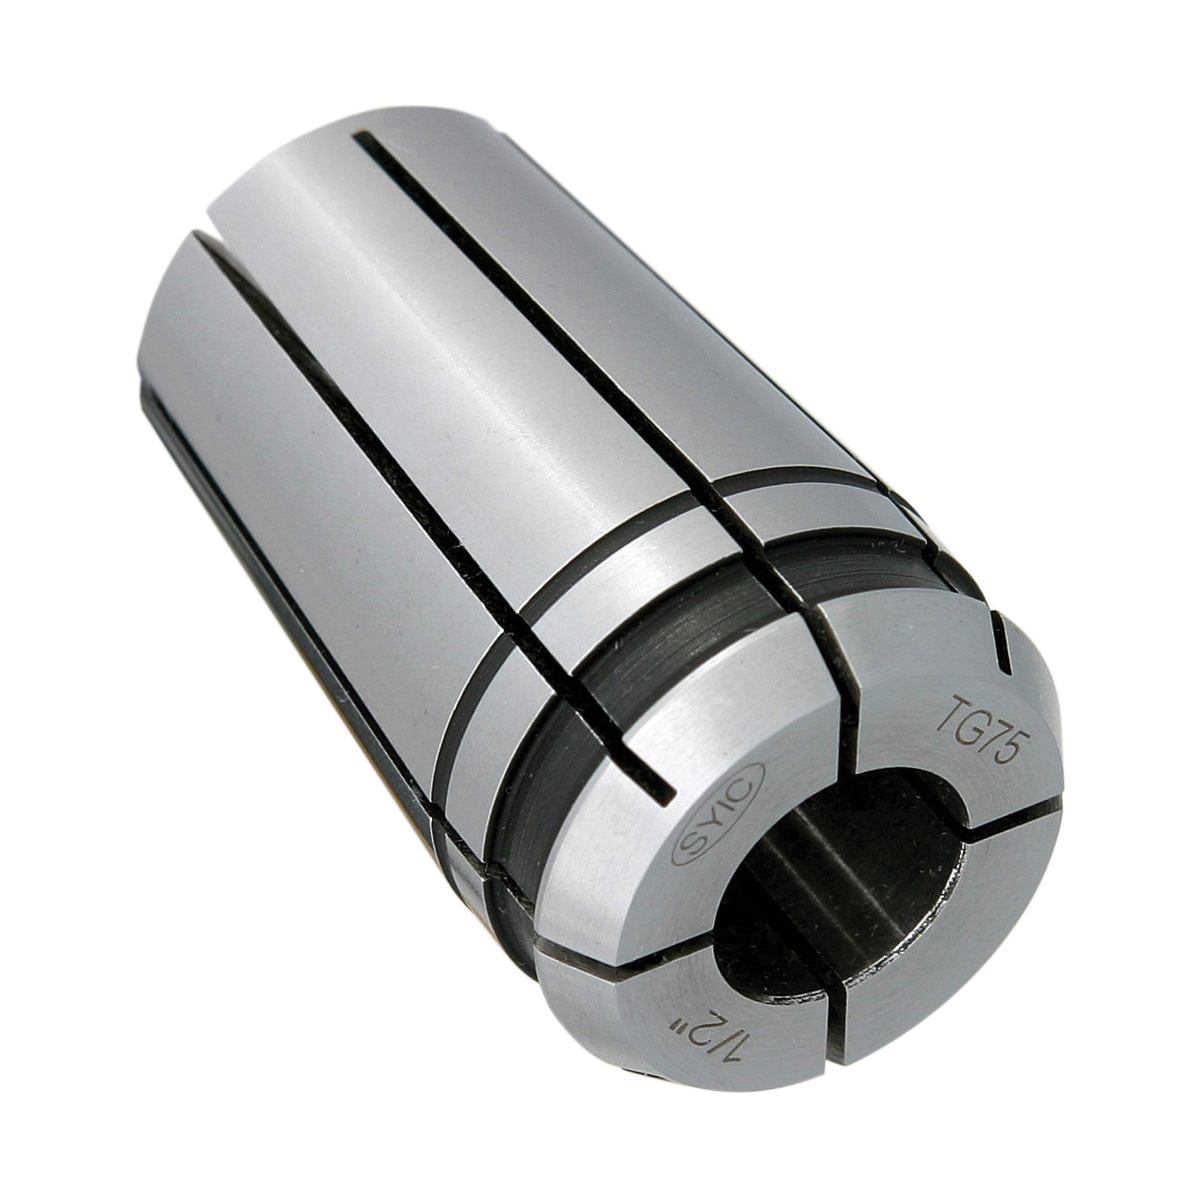 TG75 41/64" COLLET